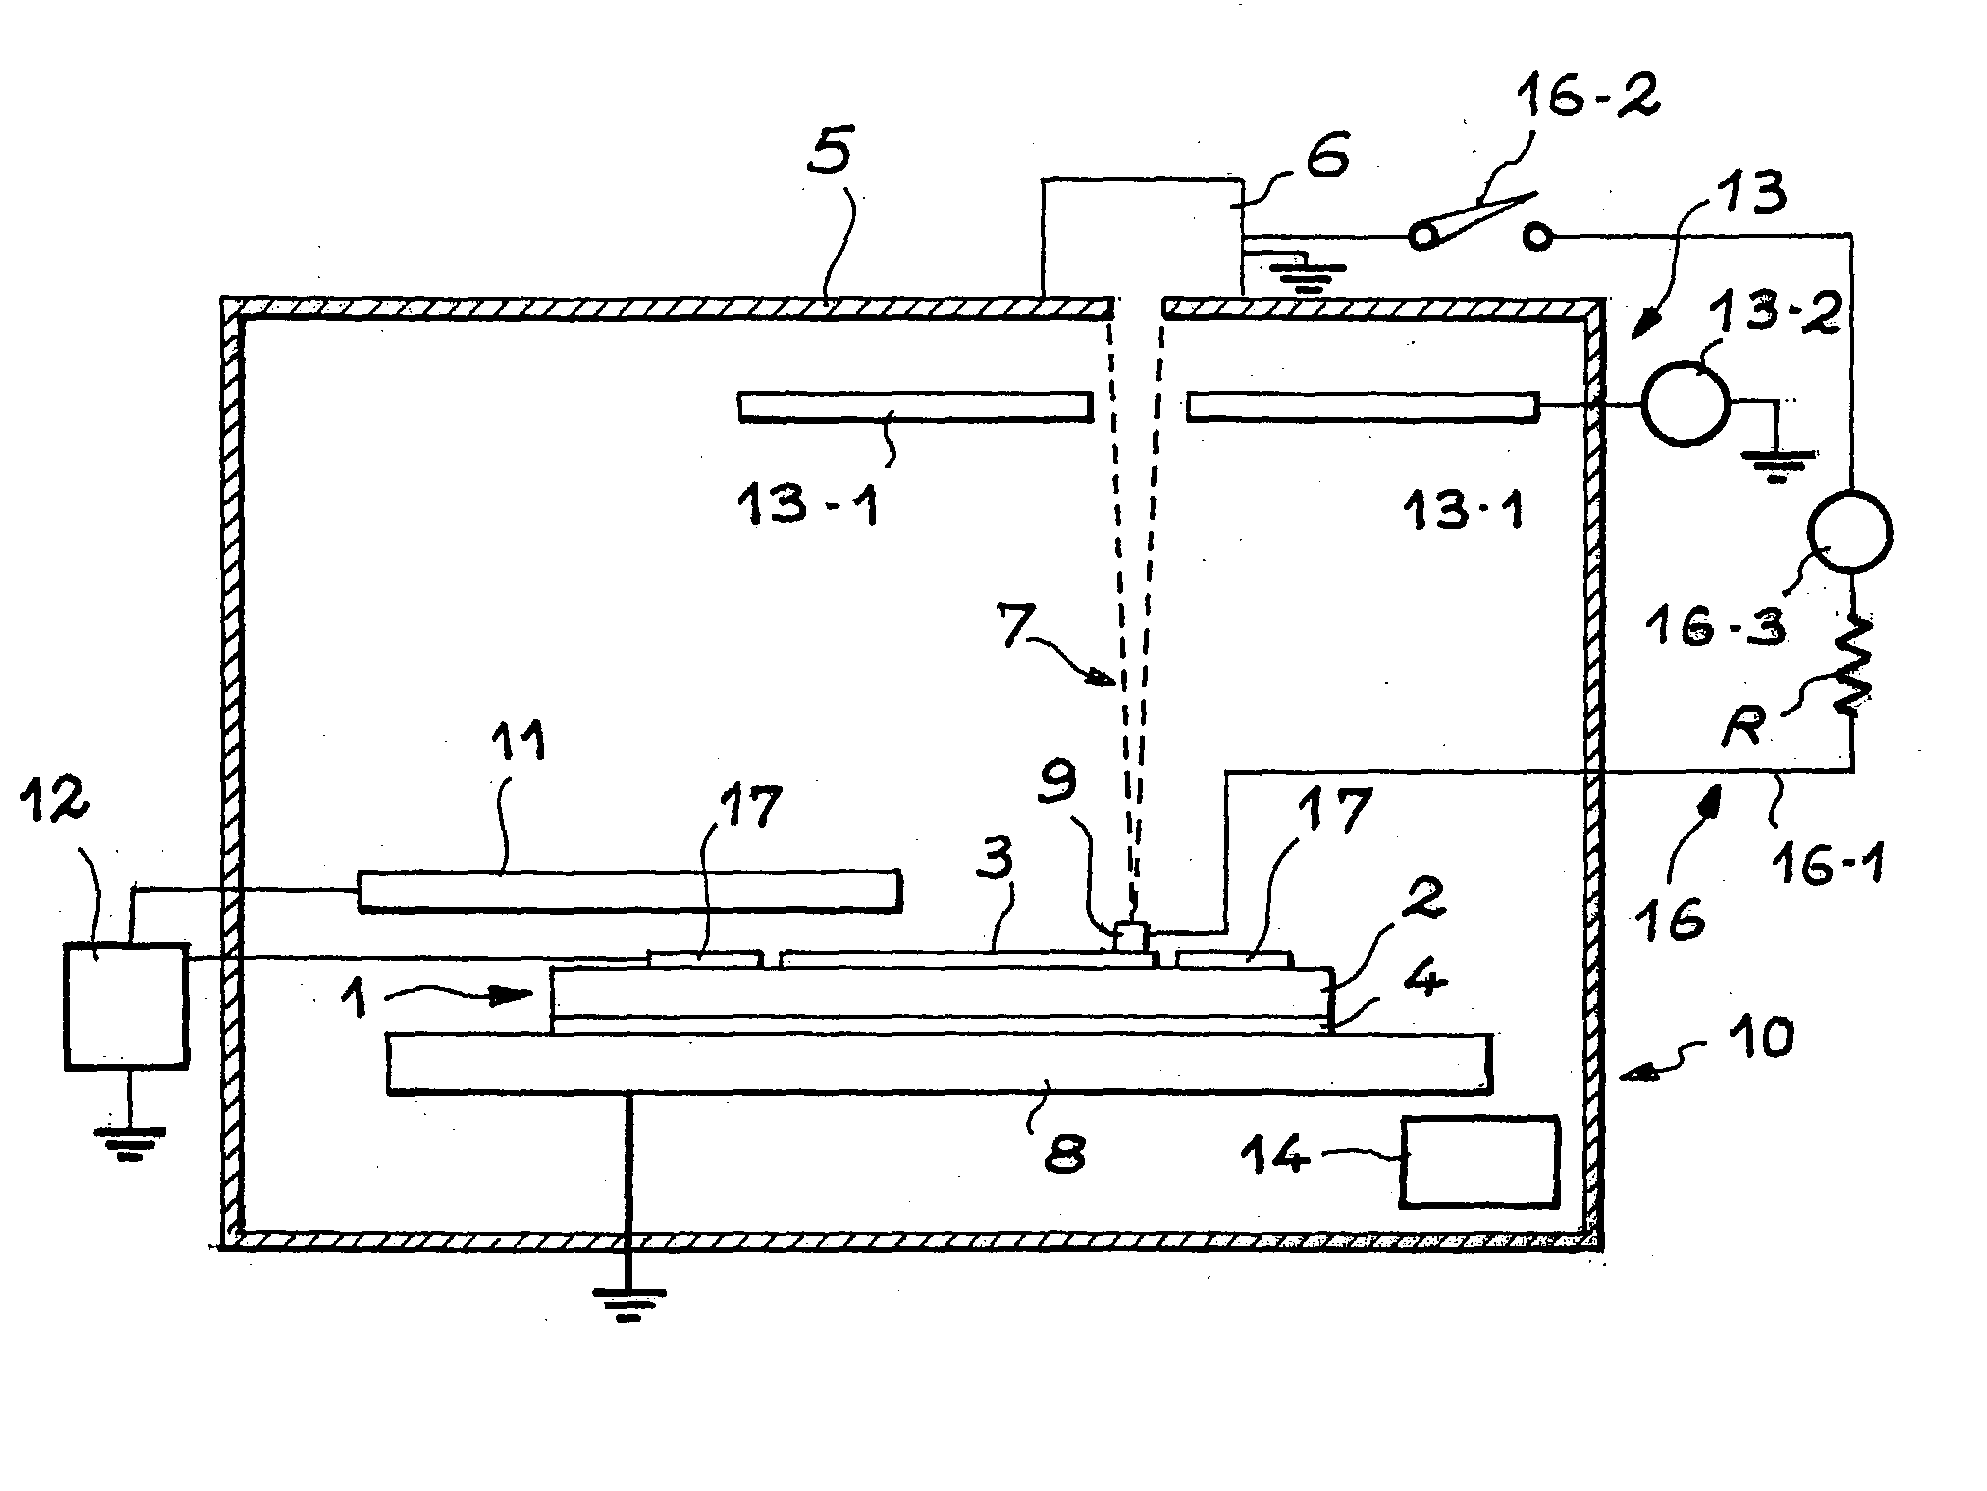 Method for charging a structure comprising an insulating body